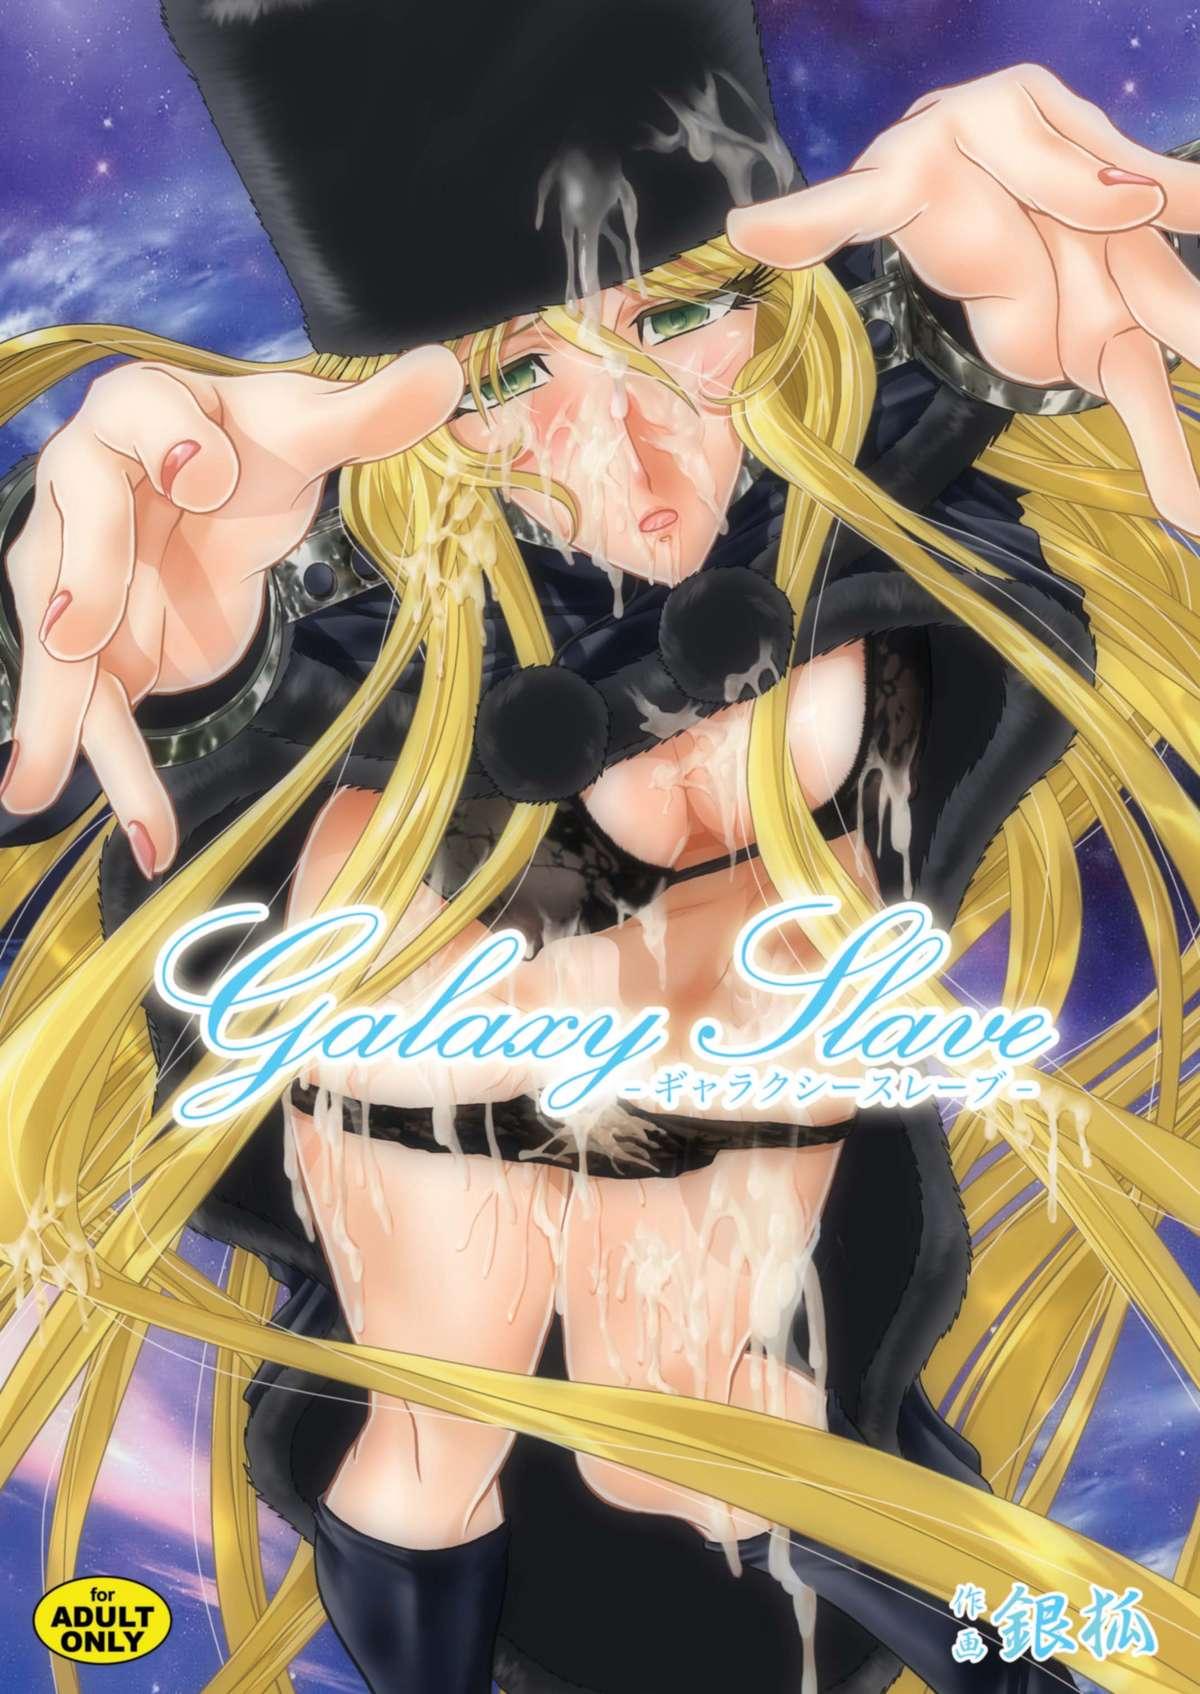 Yanks Featured Galaxy Slave - Galaxy express 999 Bigboobs - Picture 1